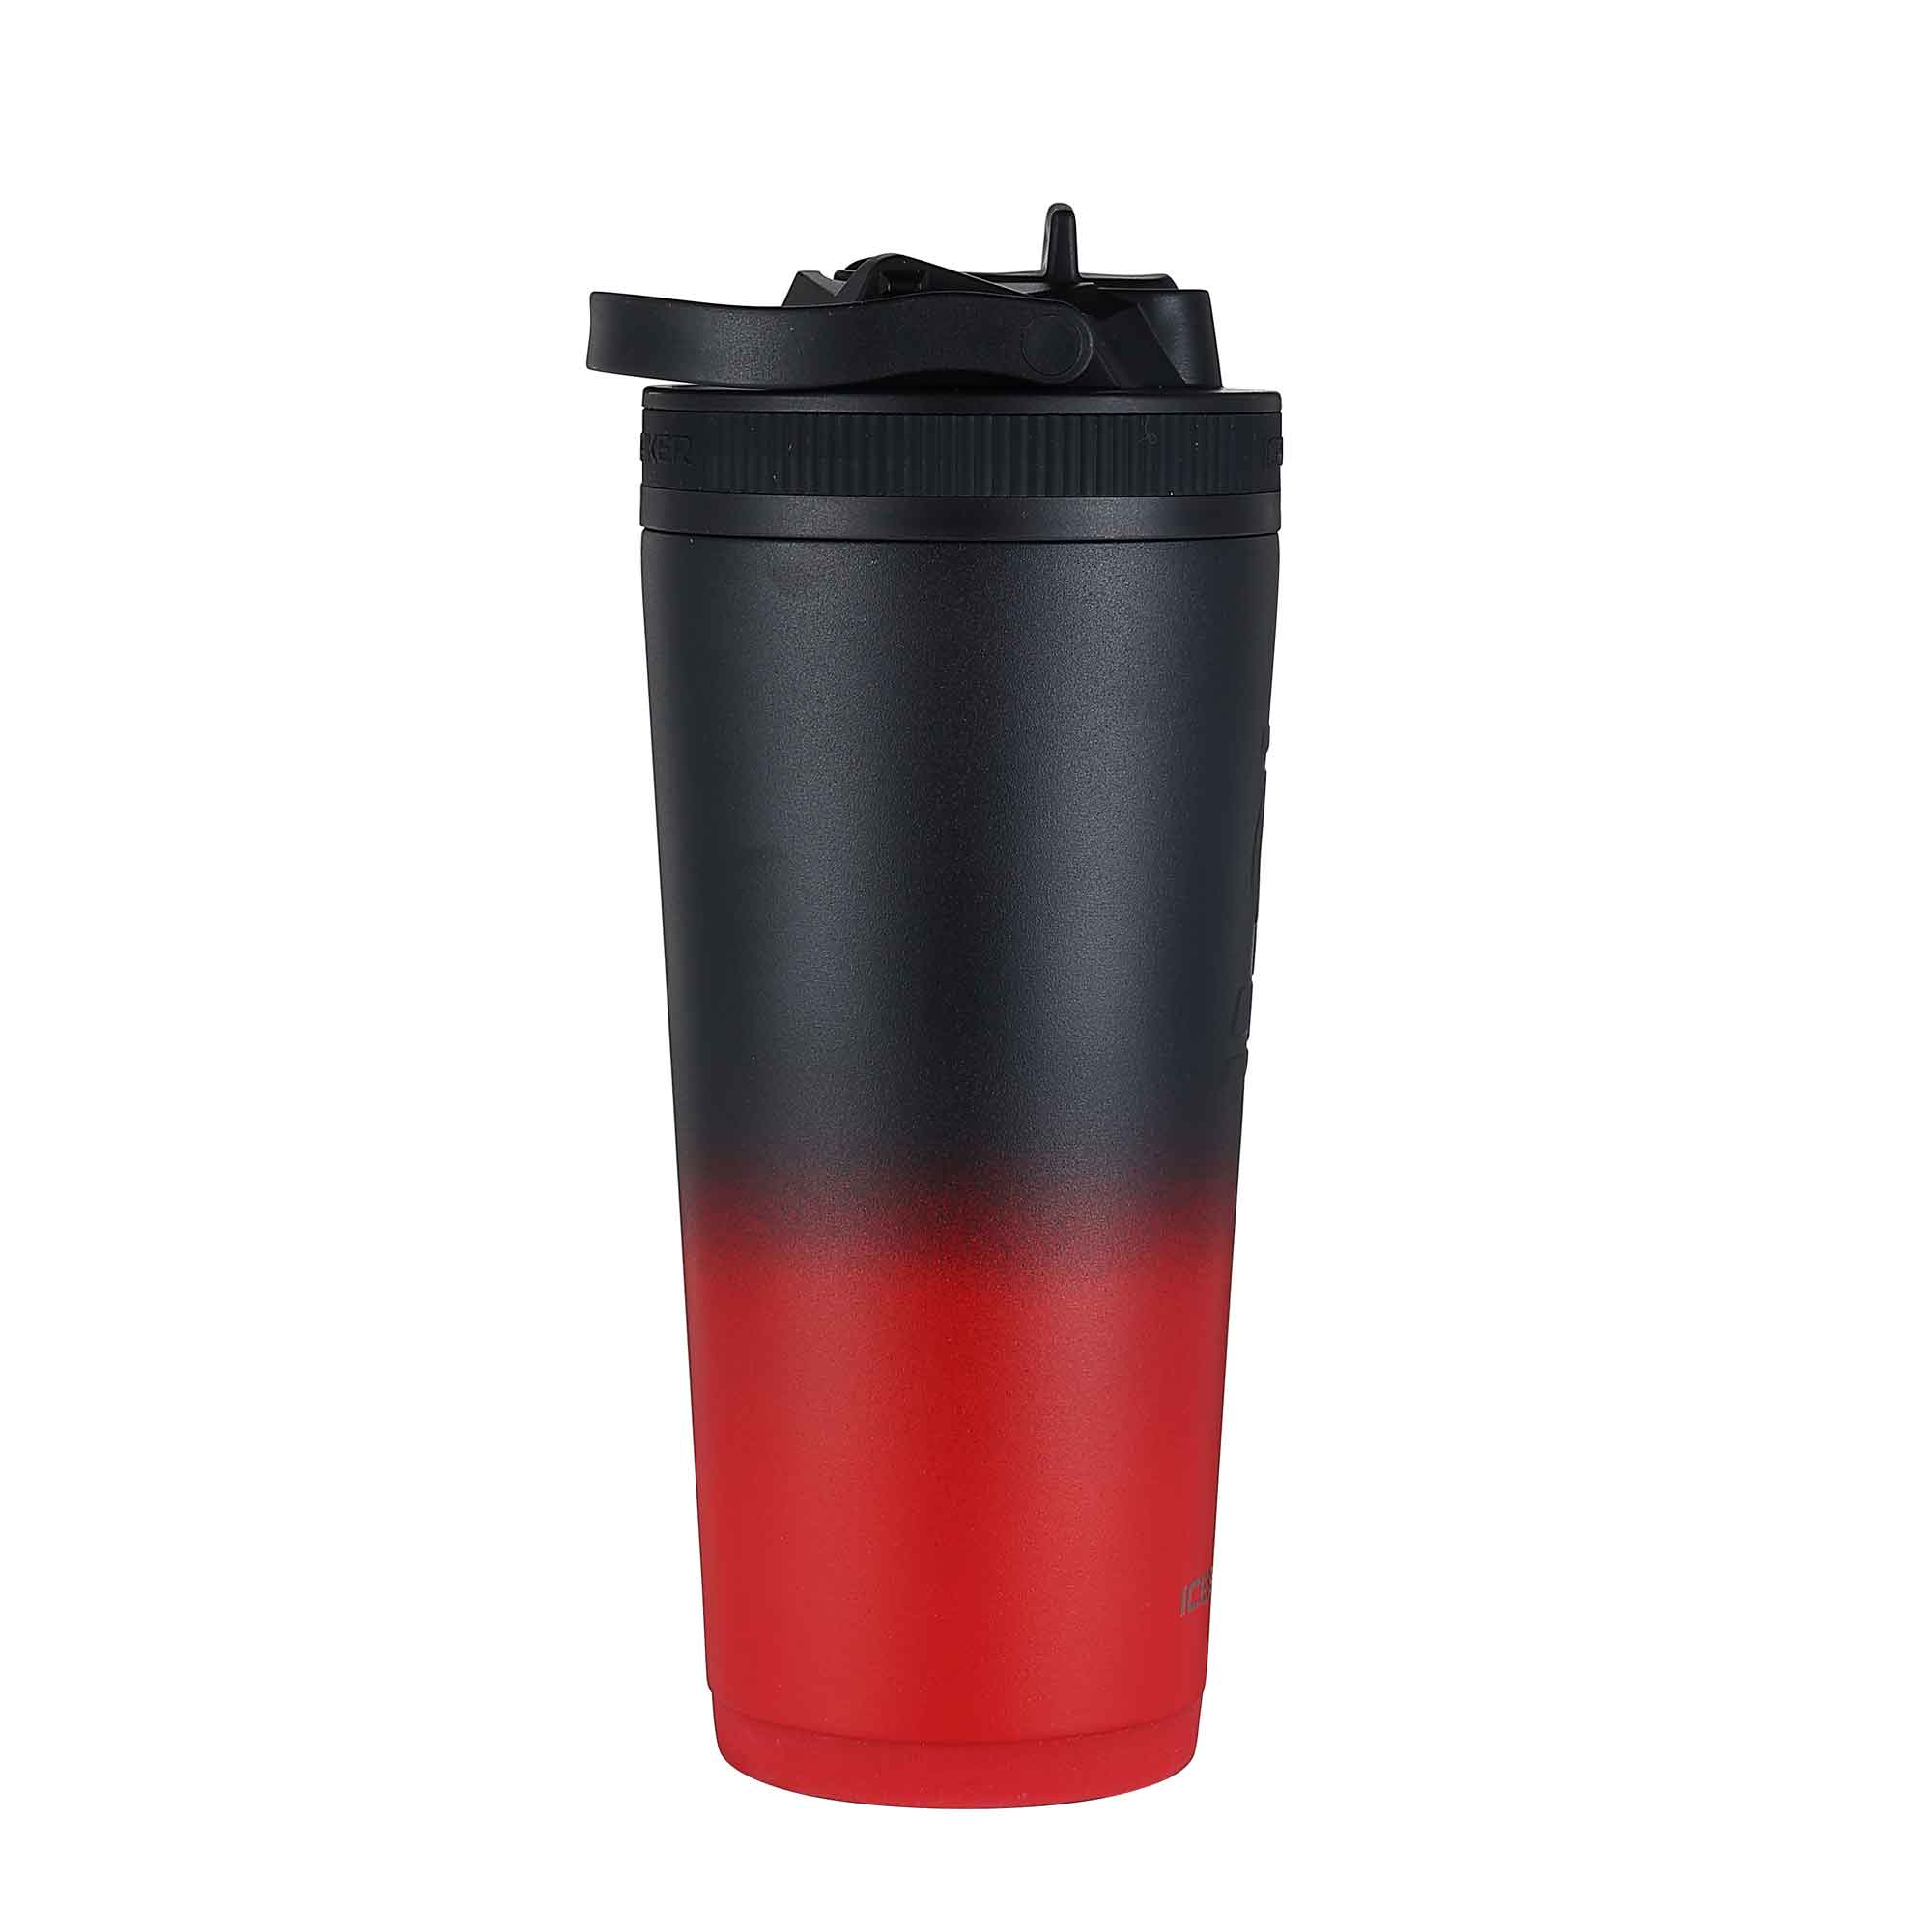 That's Smart Red Plastic Cup 16 Oz., Cups, Lids & Straws